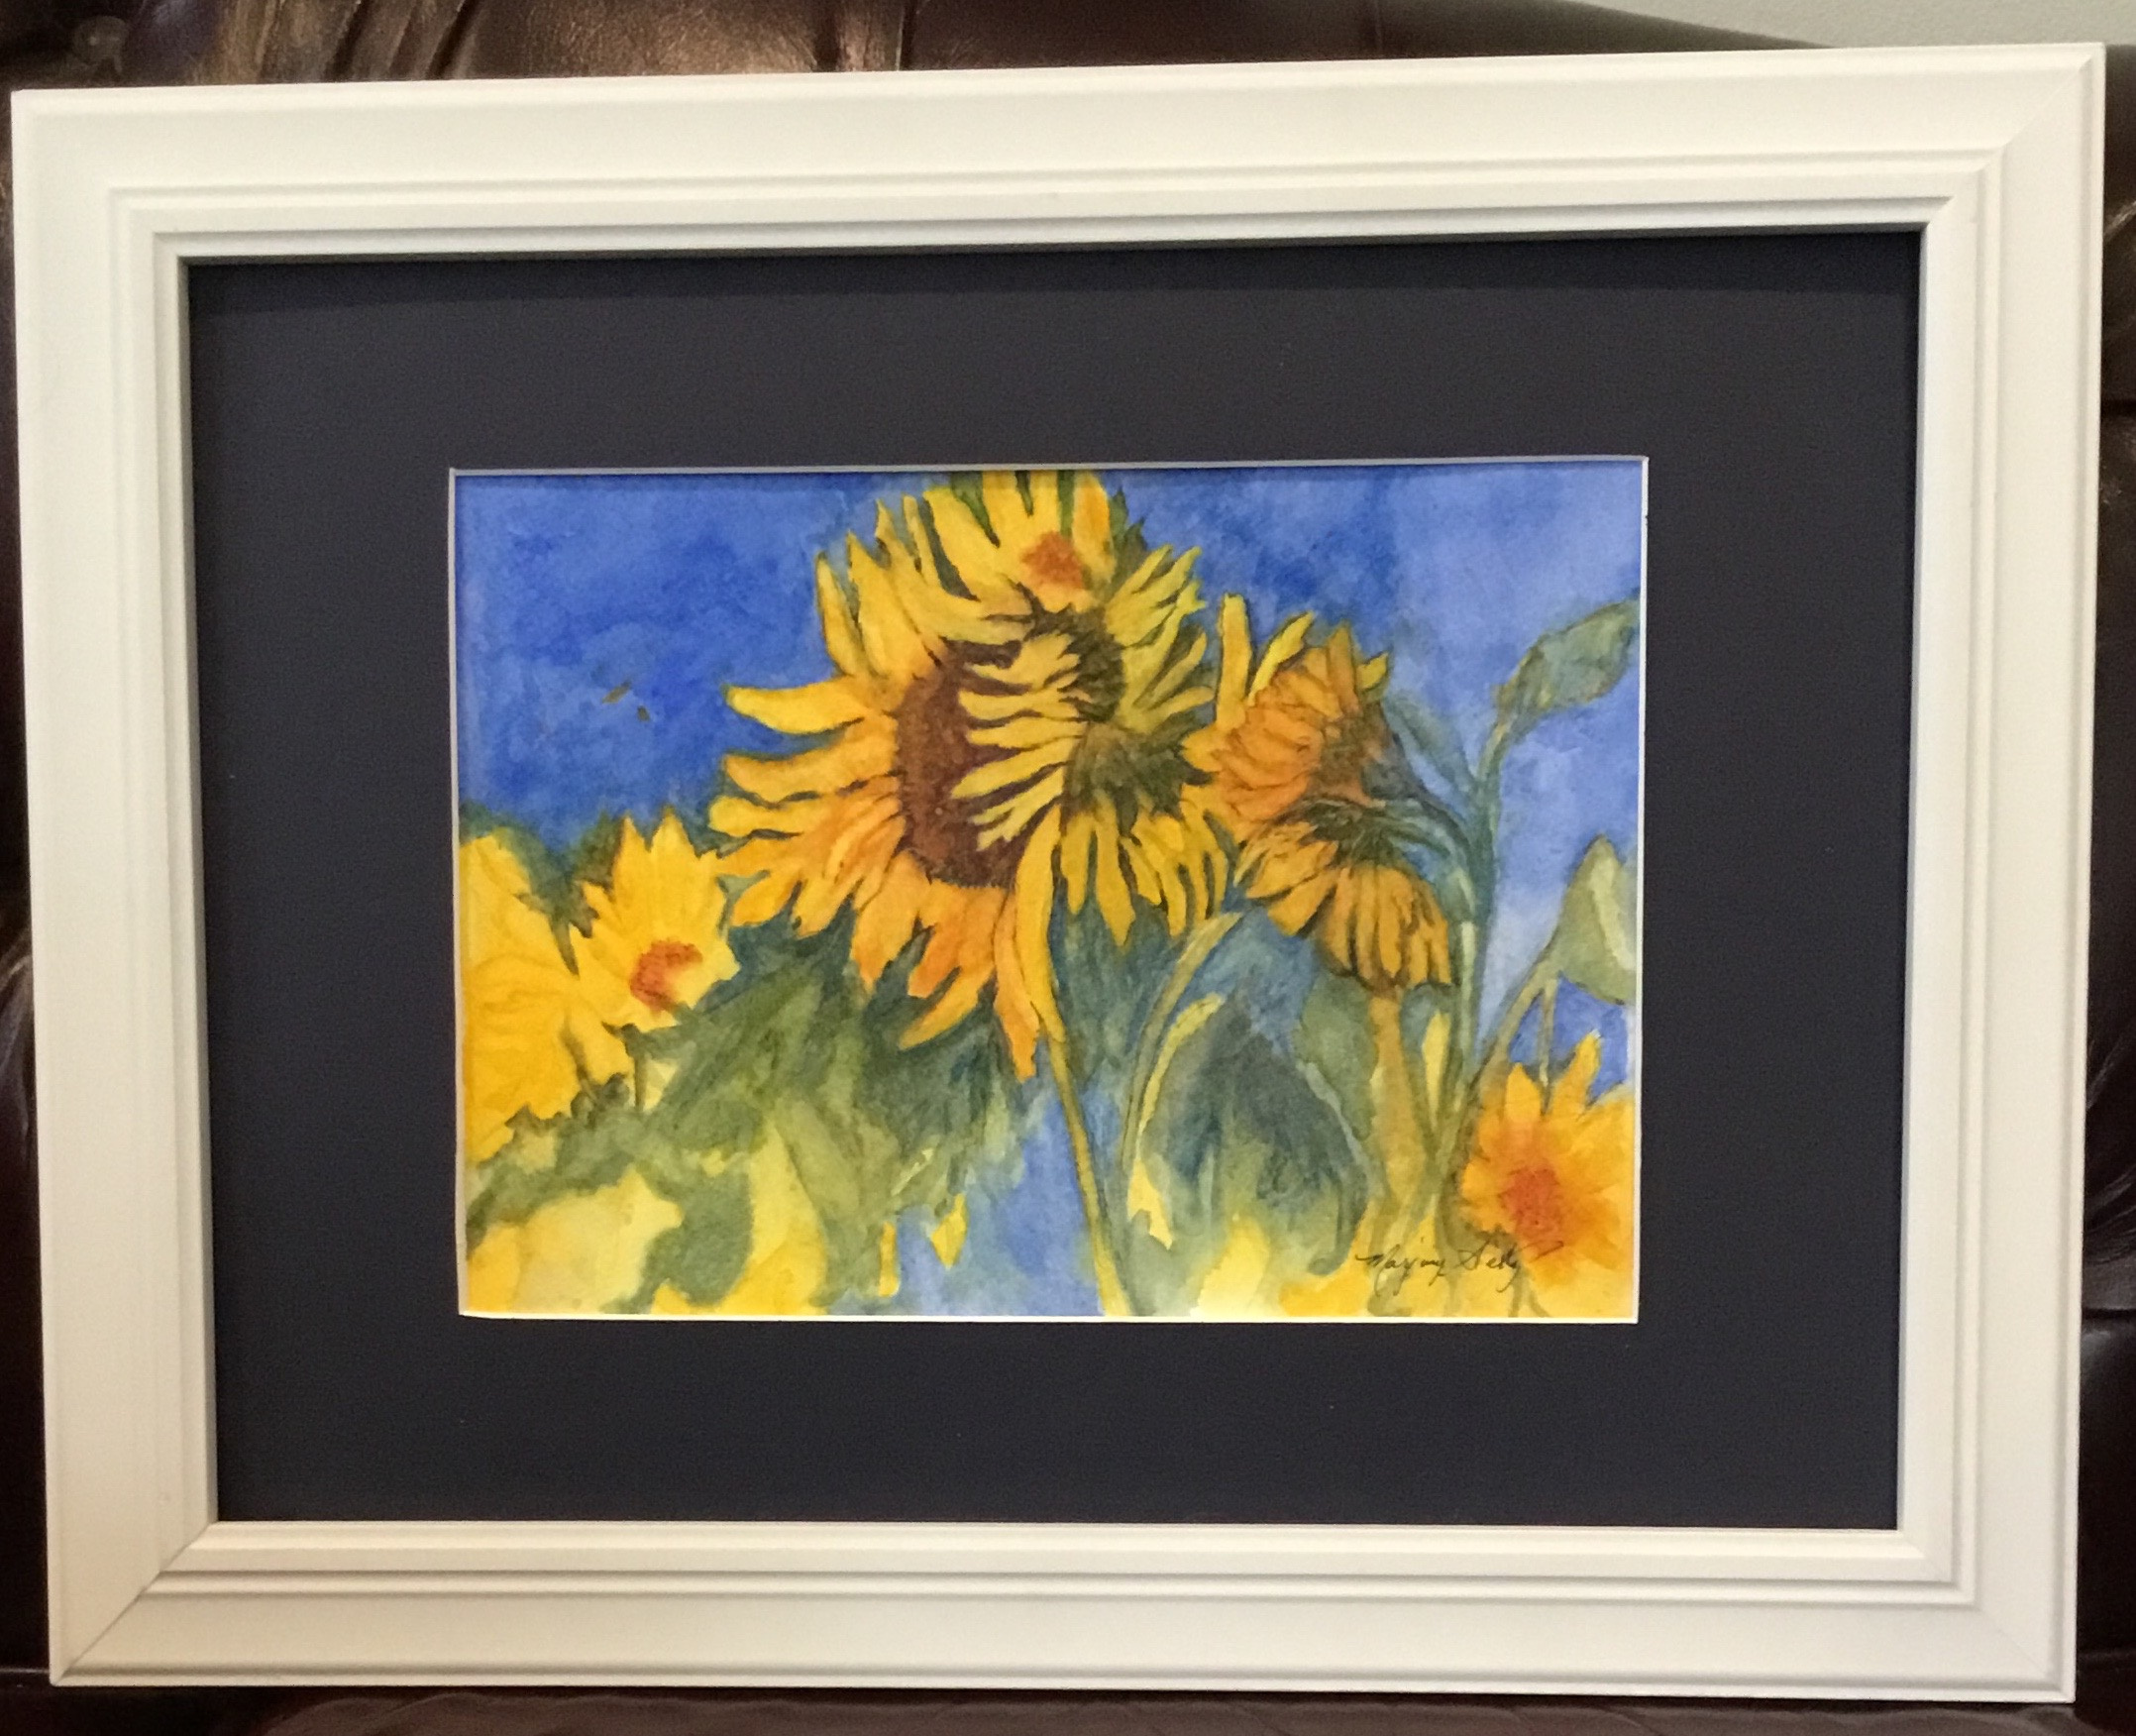 Sunflower Crazy
Watercolor on paper
11" X 7.5"
$175.
